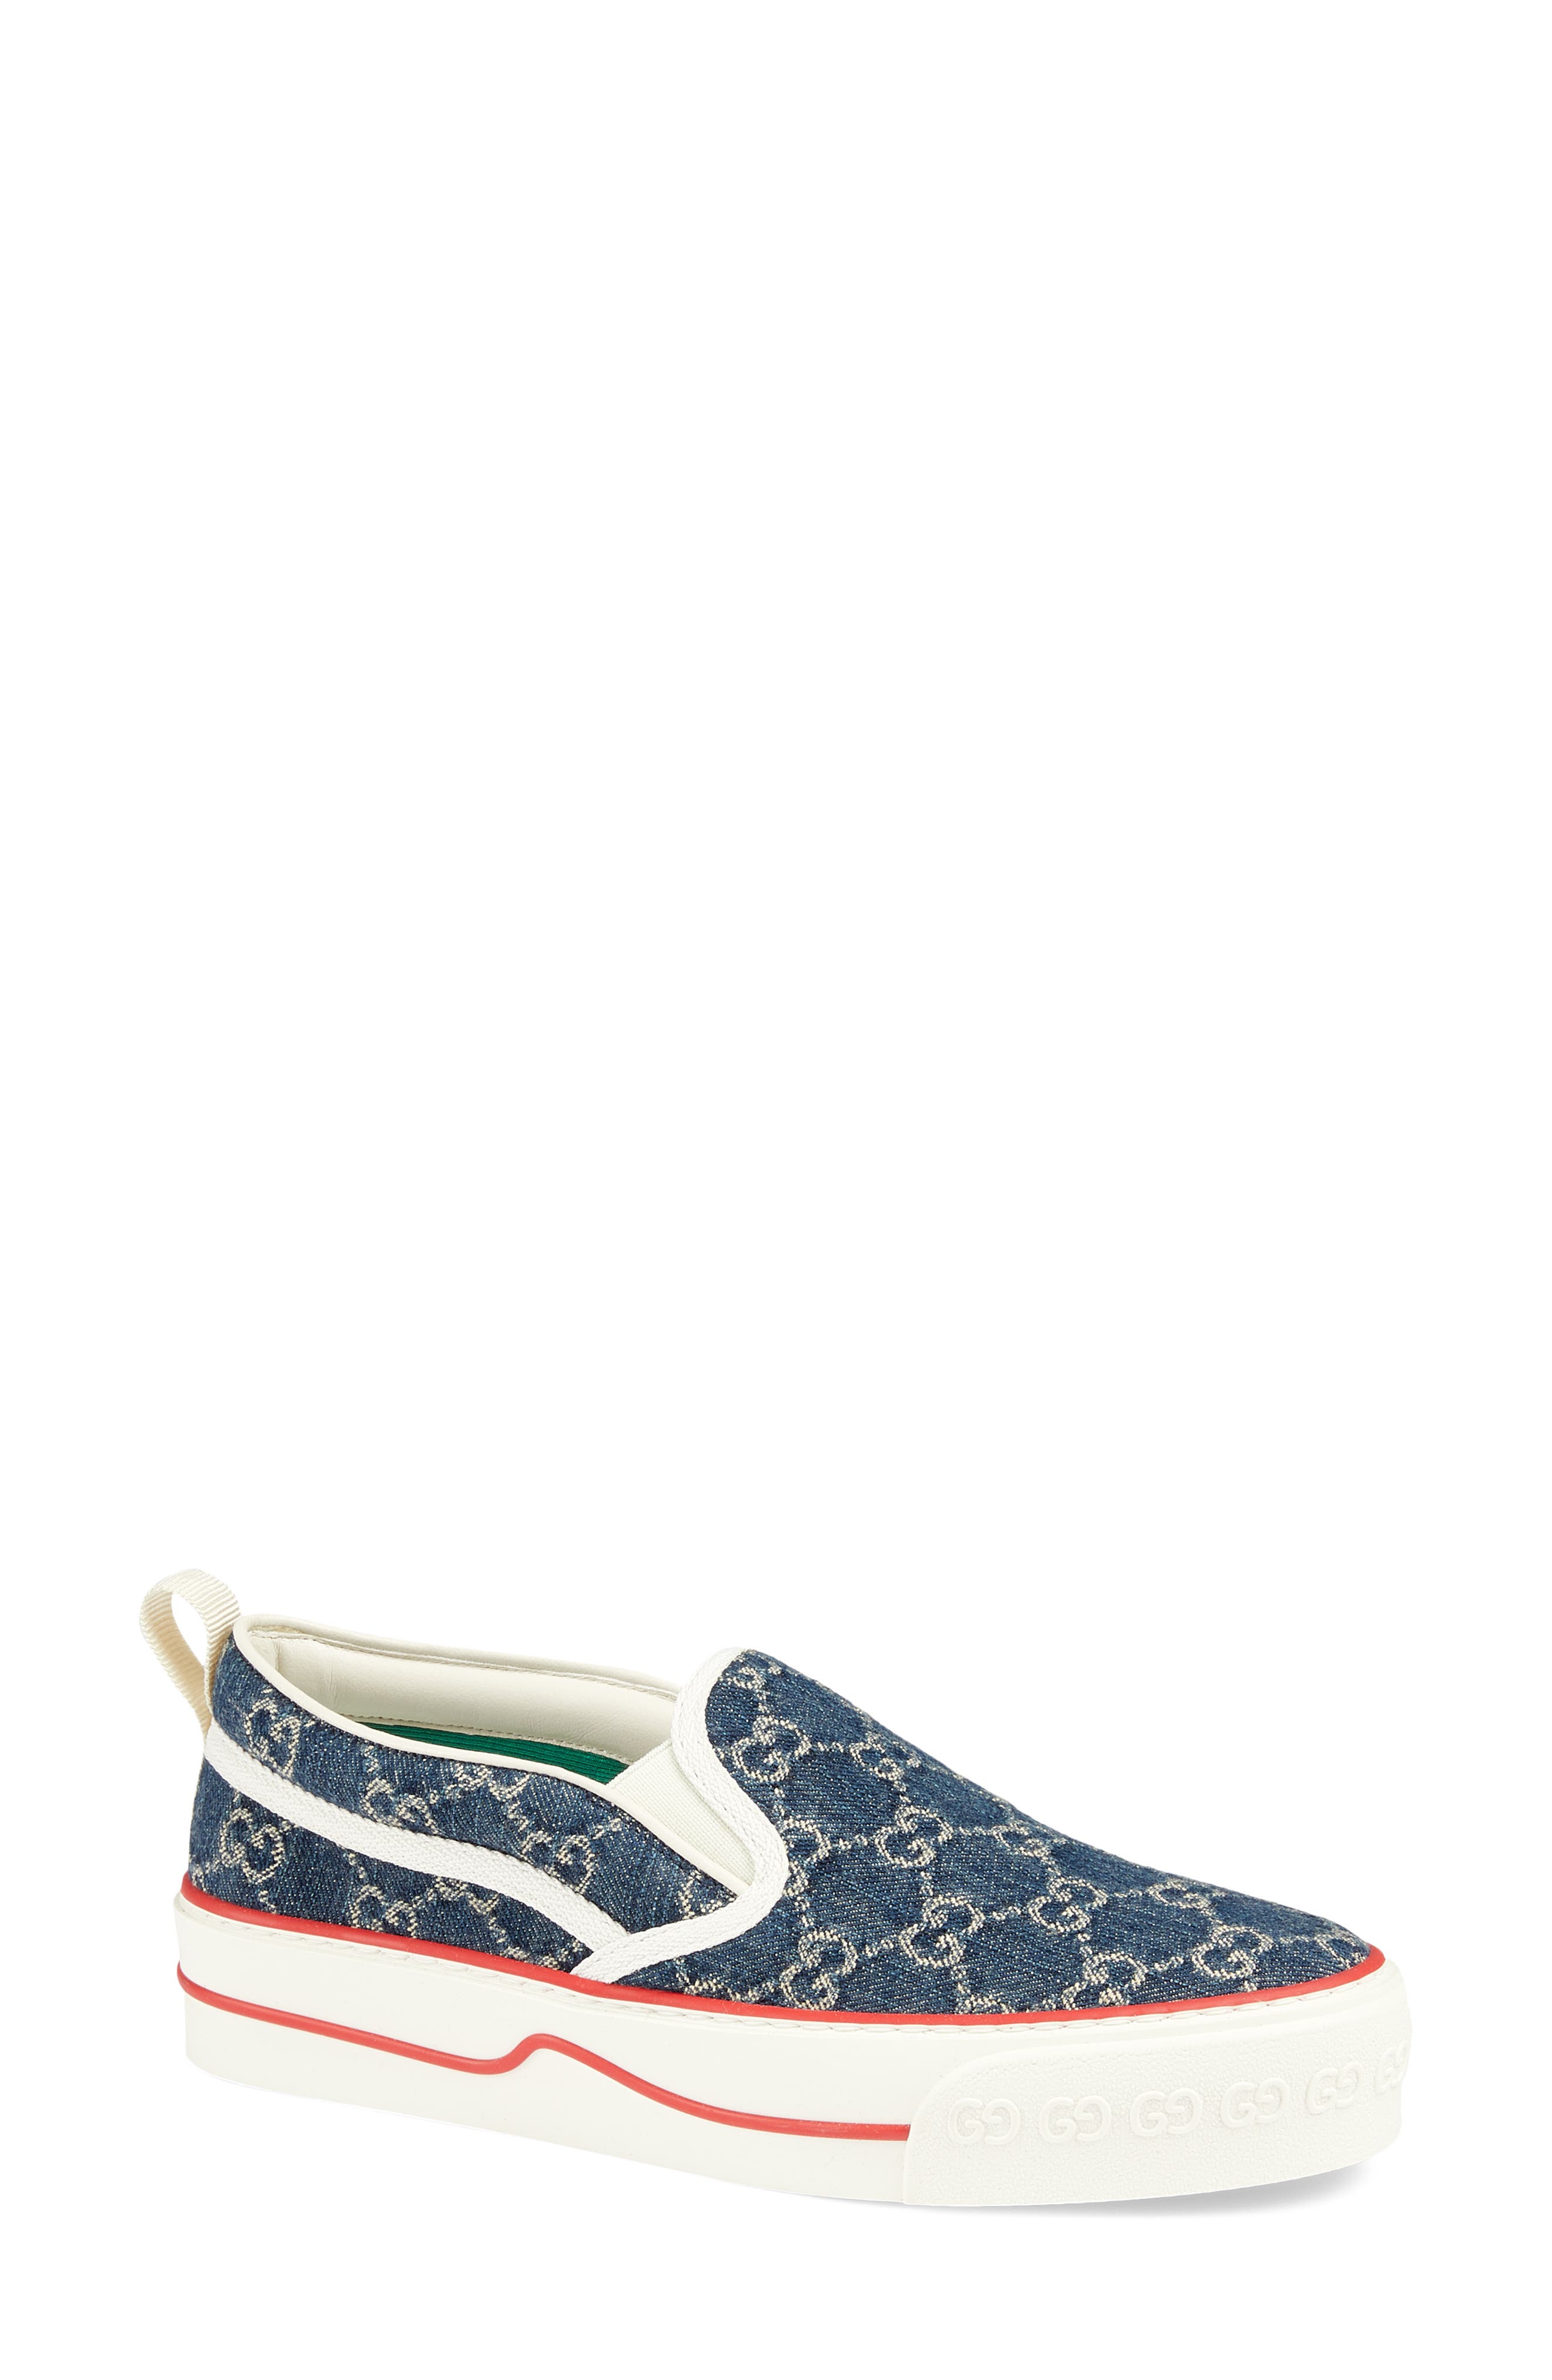 gucci slip on sneakers womens